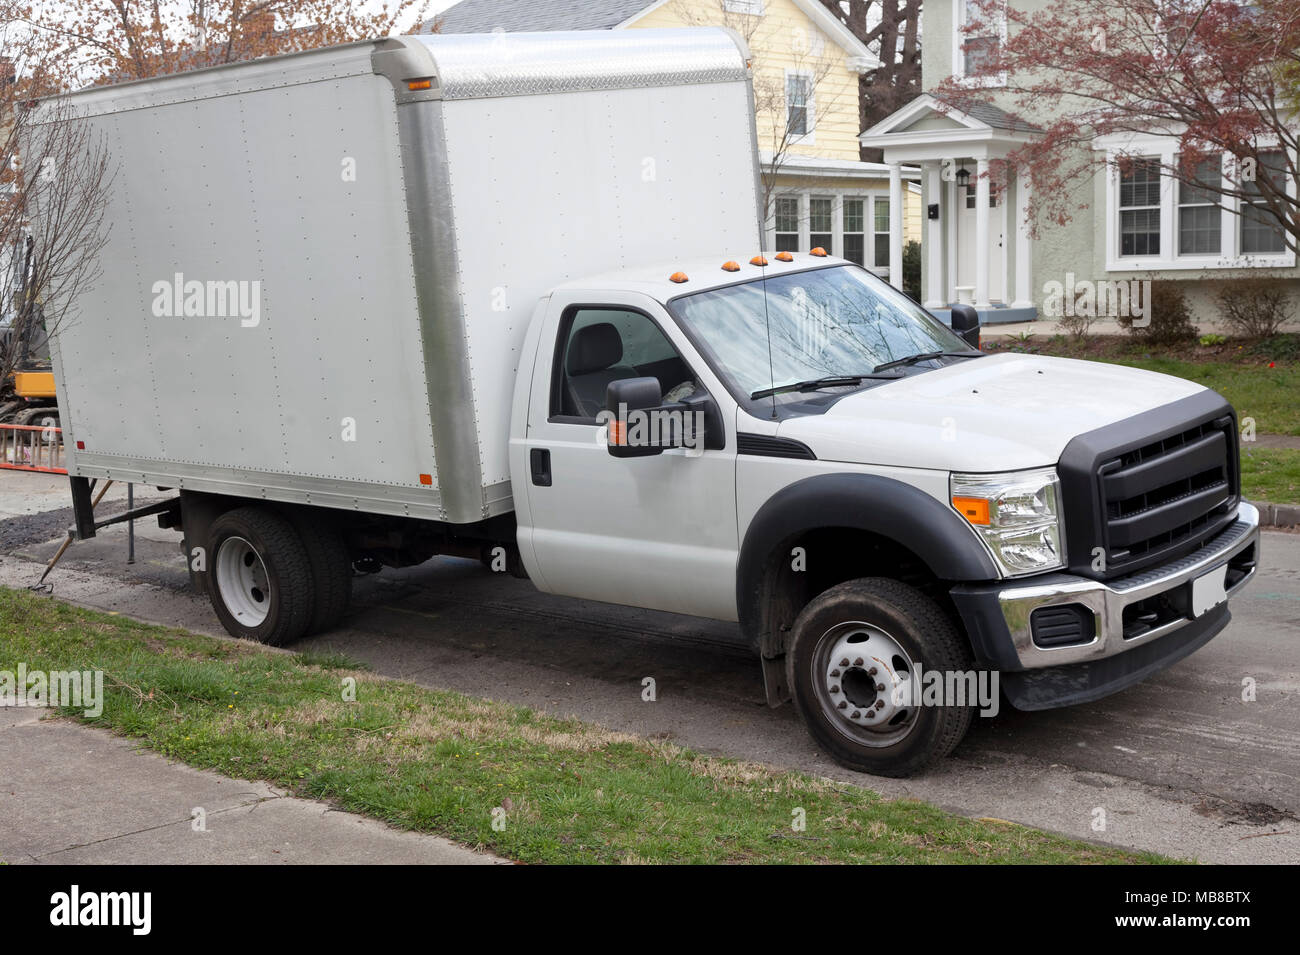 White delivery lorry van parked on residential neighborhood street. Stock Photo